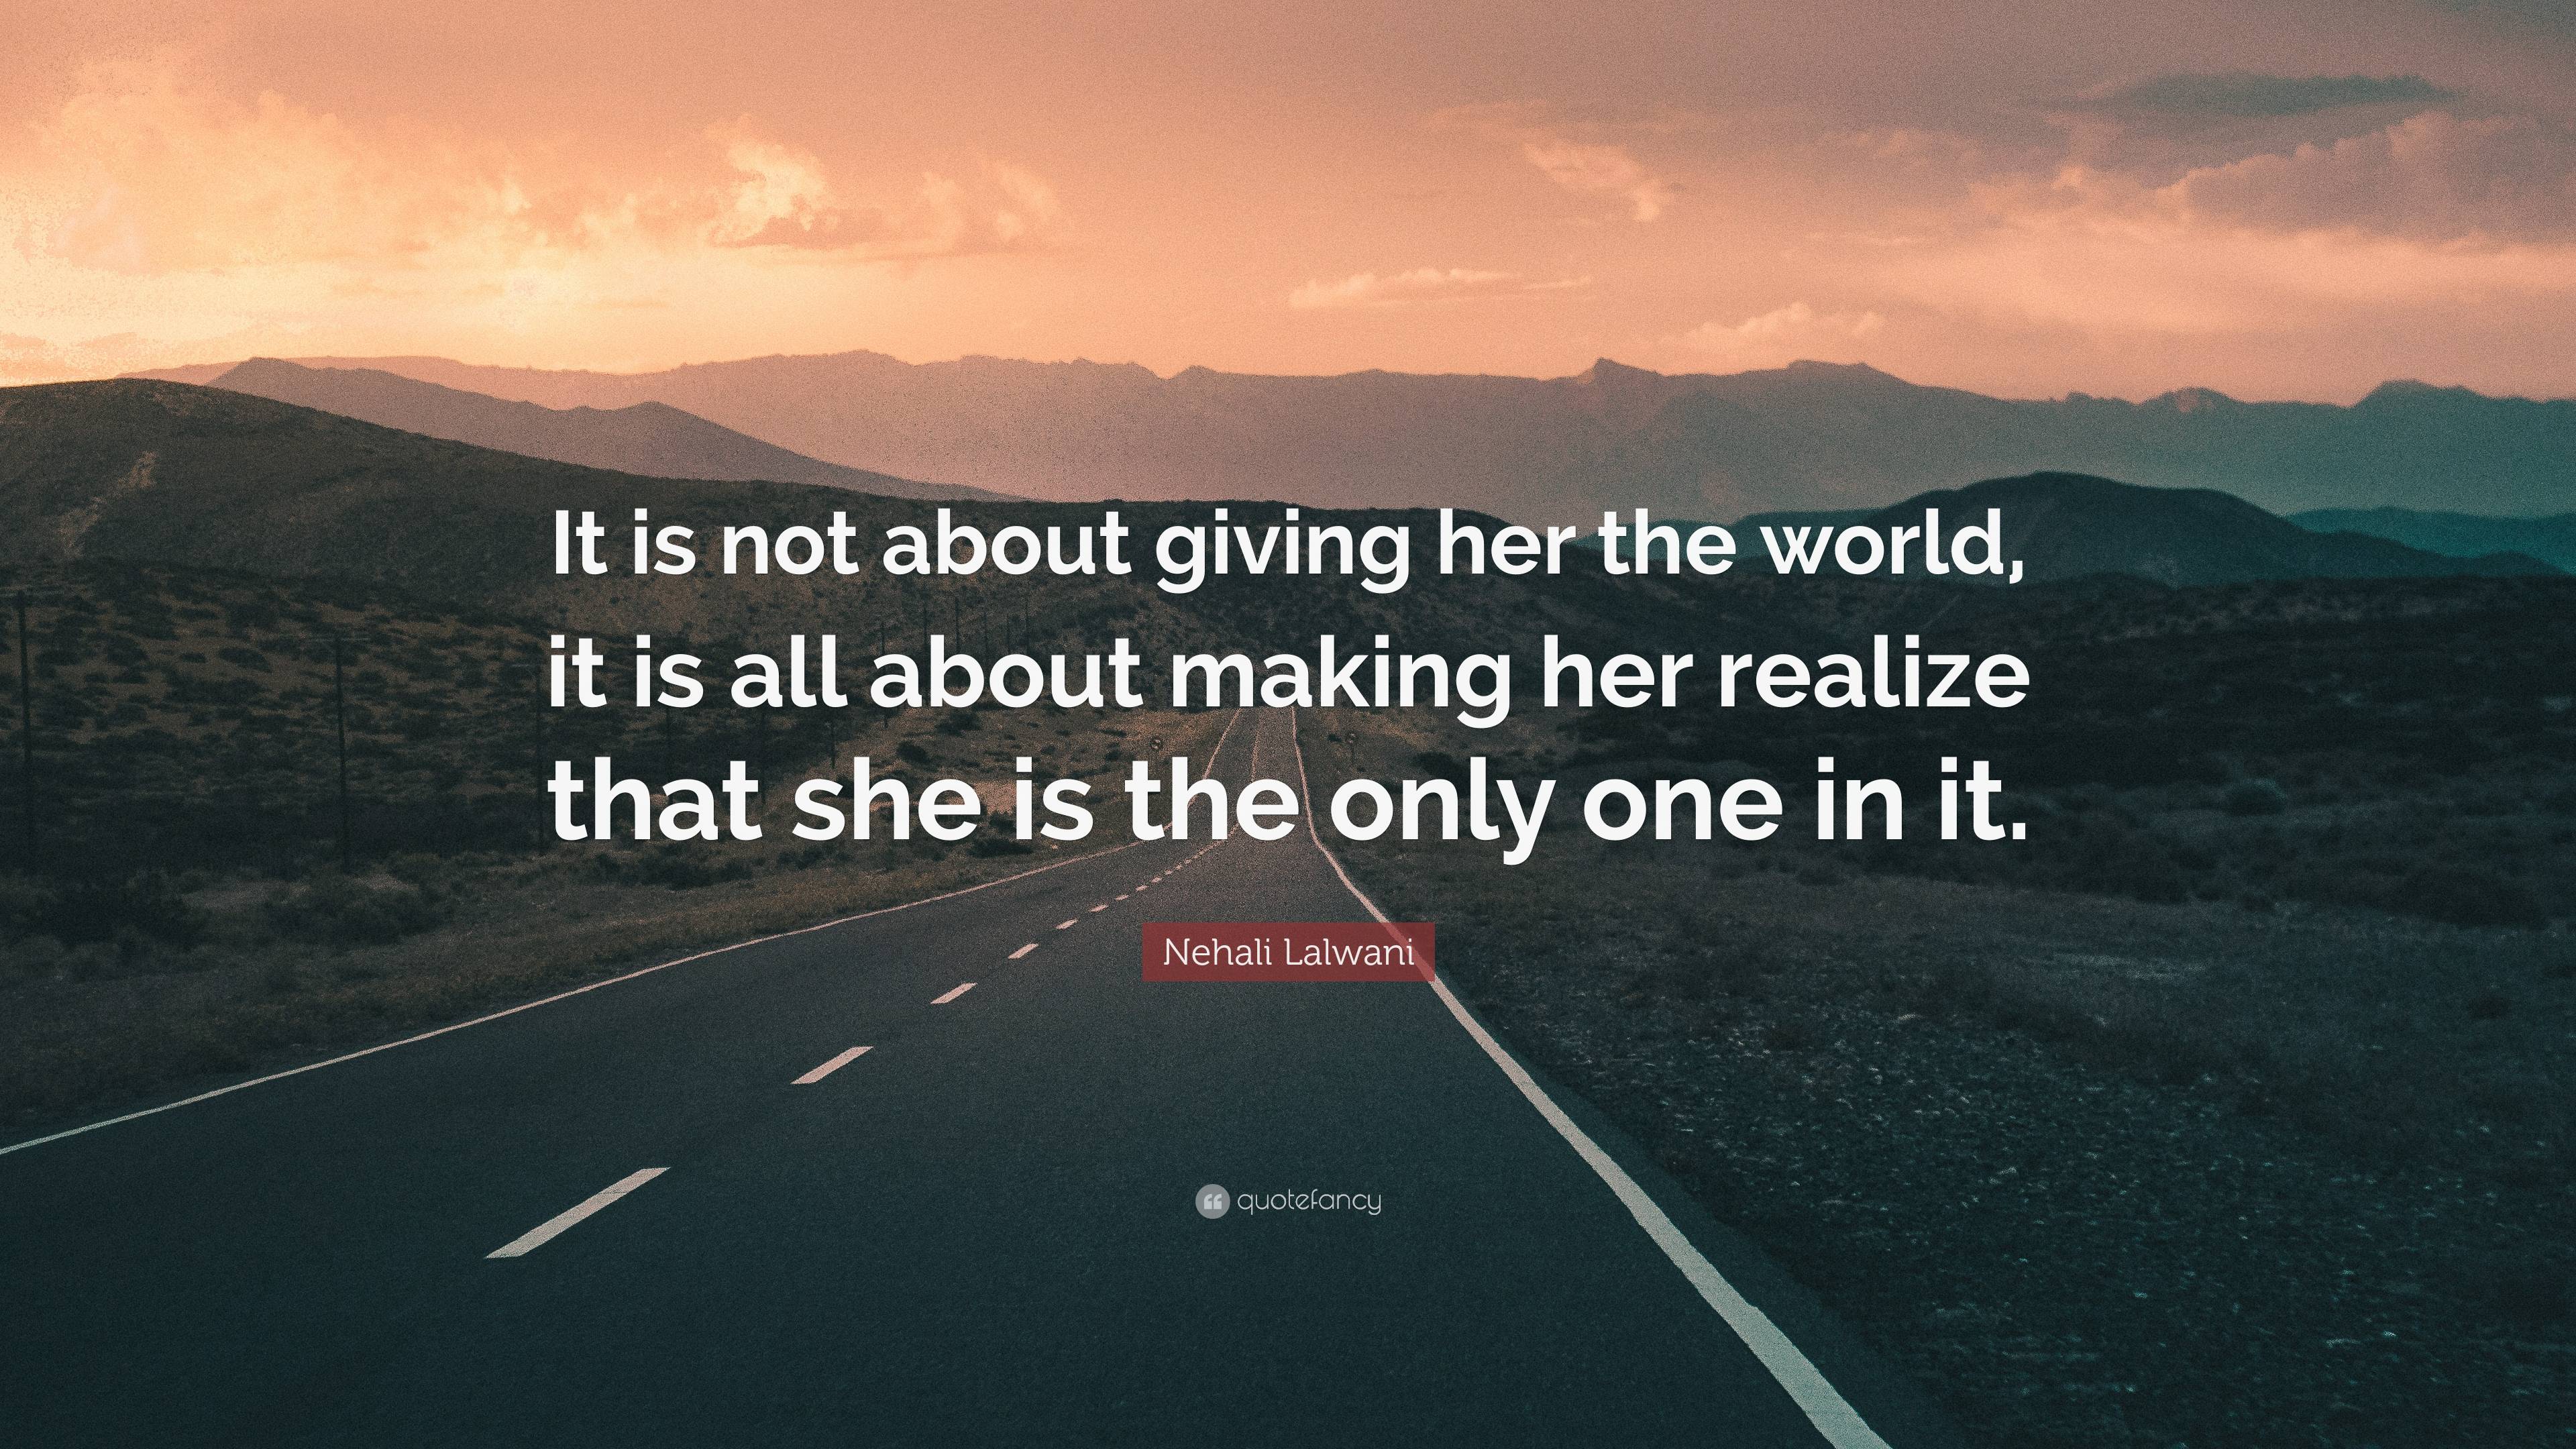 Nehali Lalwani Quote: “It is not about giving her the world, it is all ...